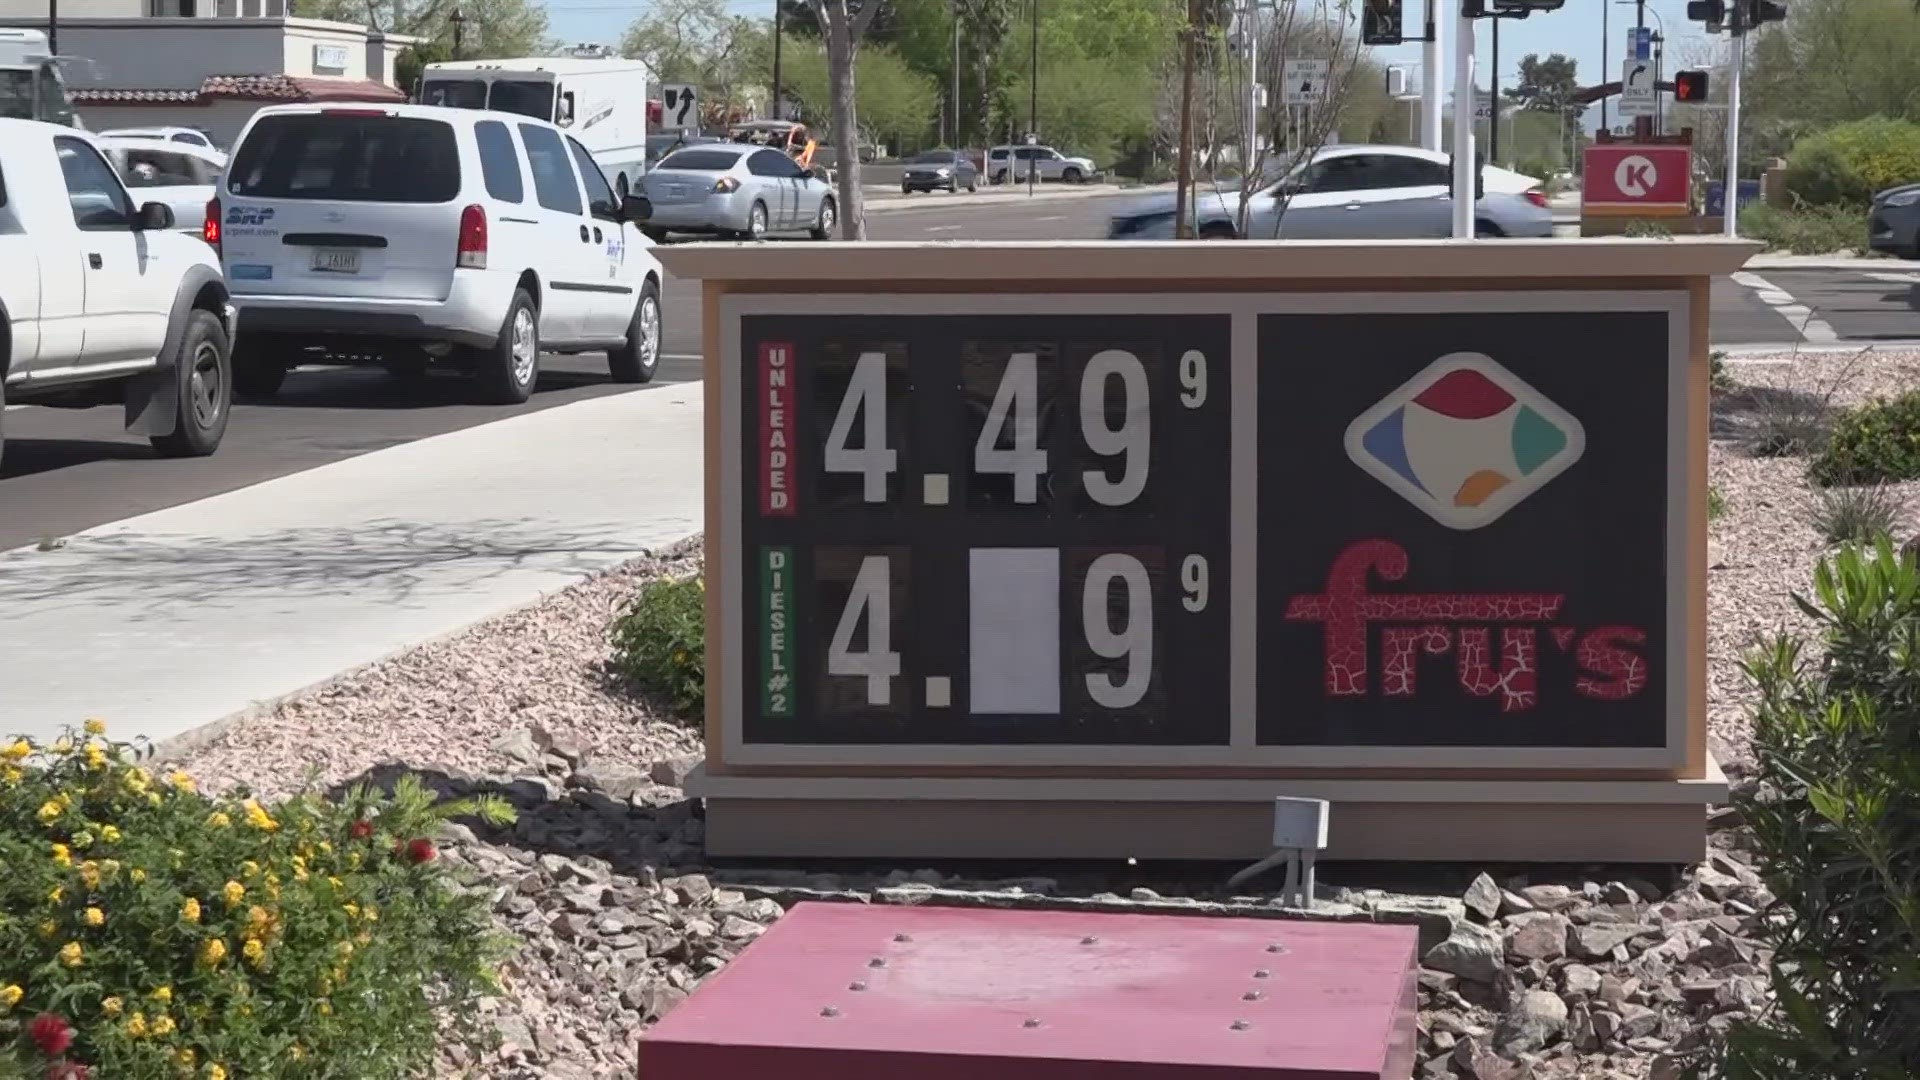 Right now, Arizona ranks third in the nation for most expensive gas prices. 12News talked with consumers to get their take on the soaring costs.